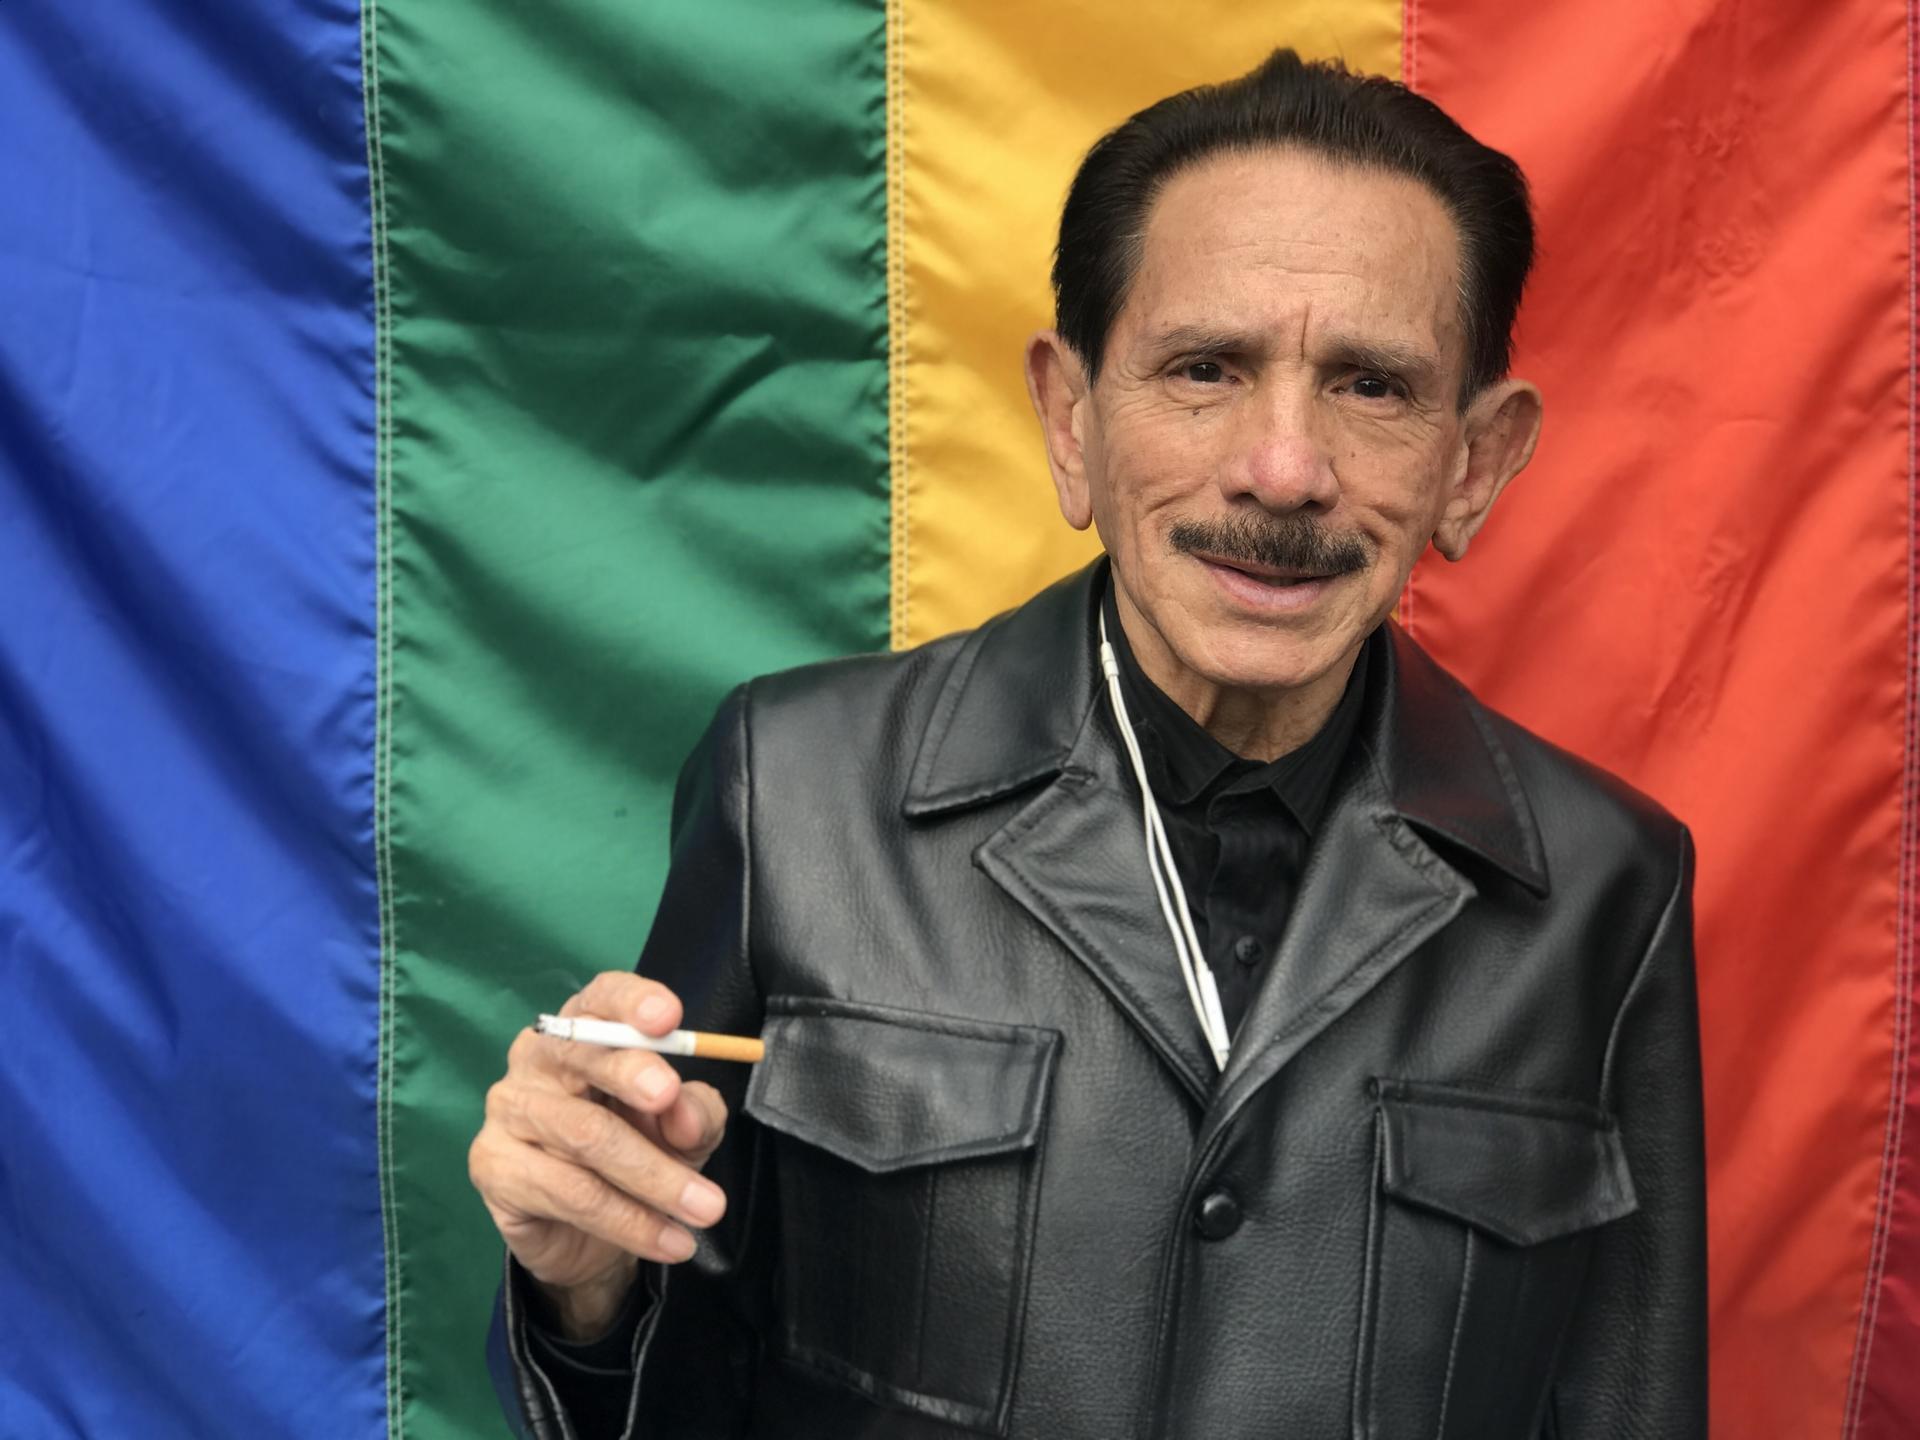 A man wearing a leather vest smokes in front of rainbow flag